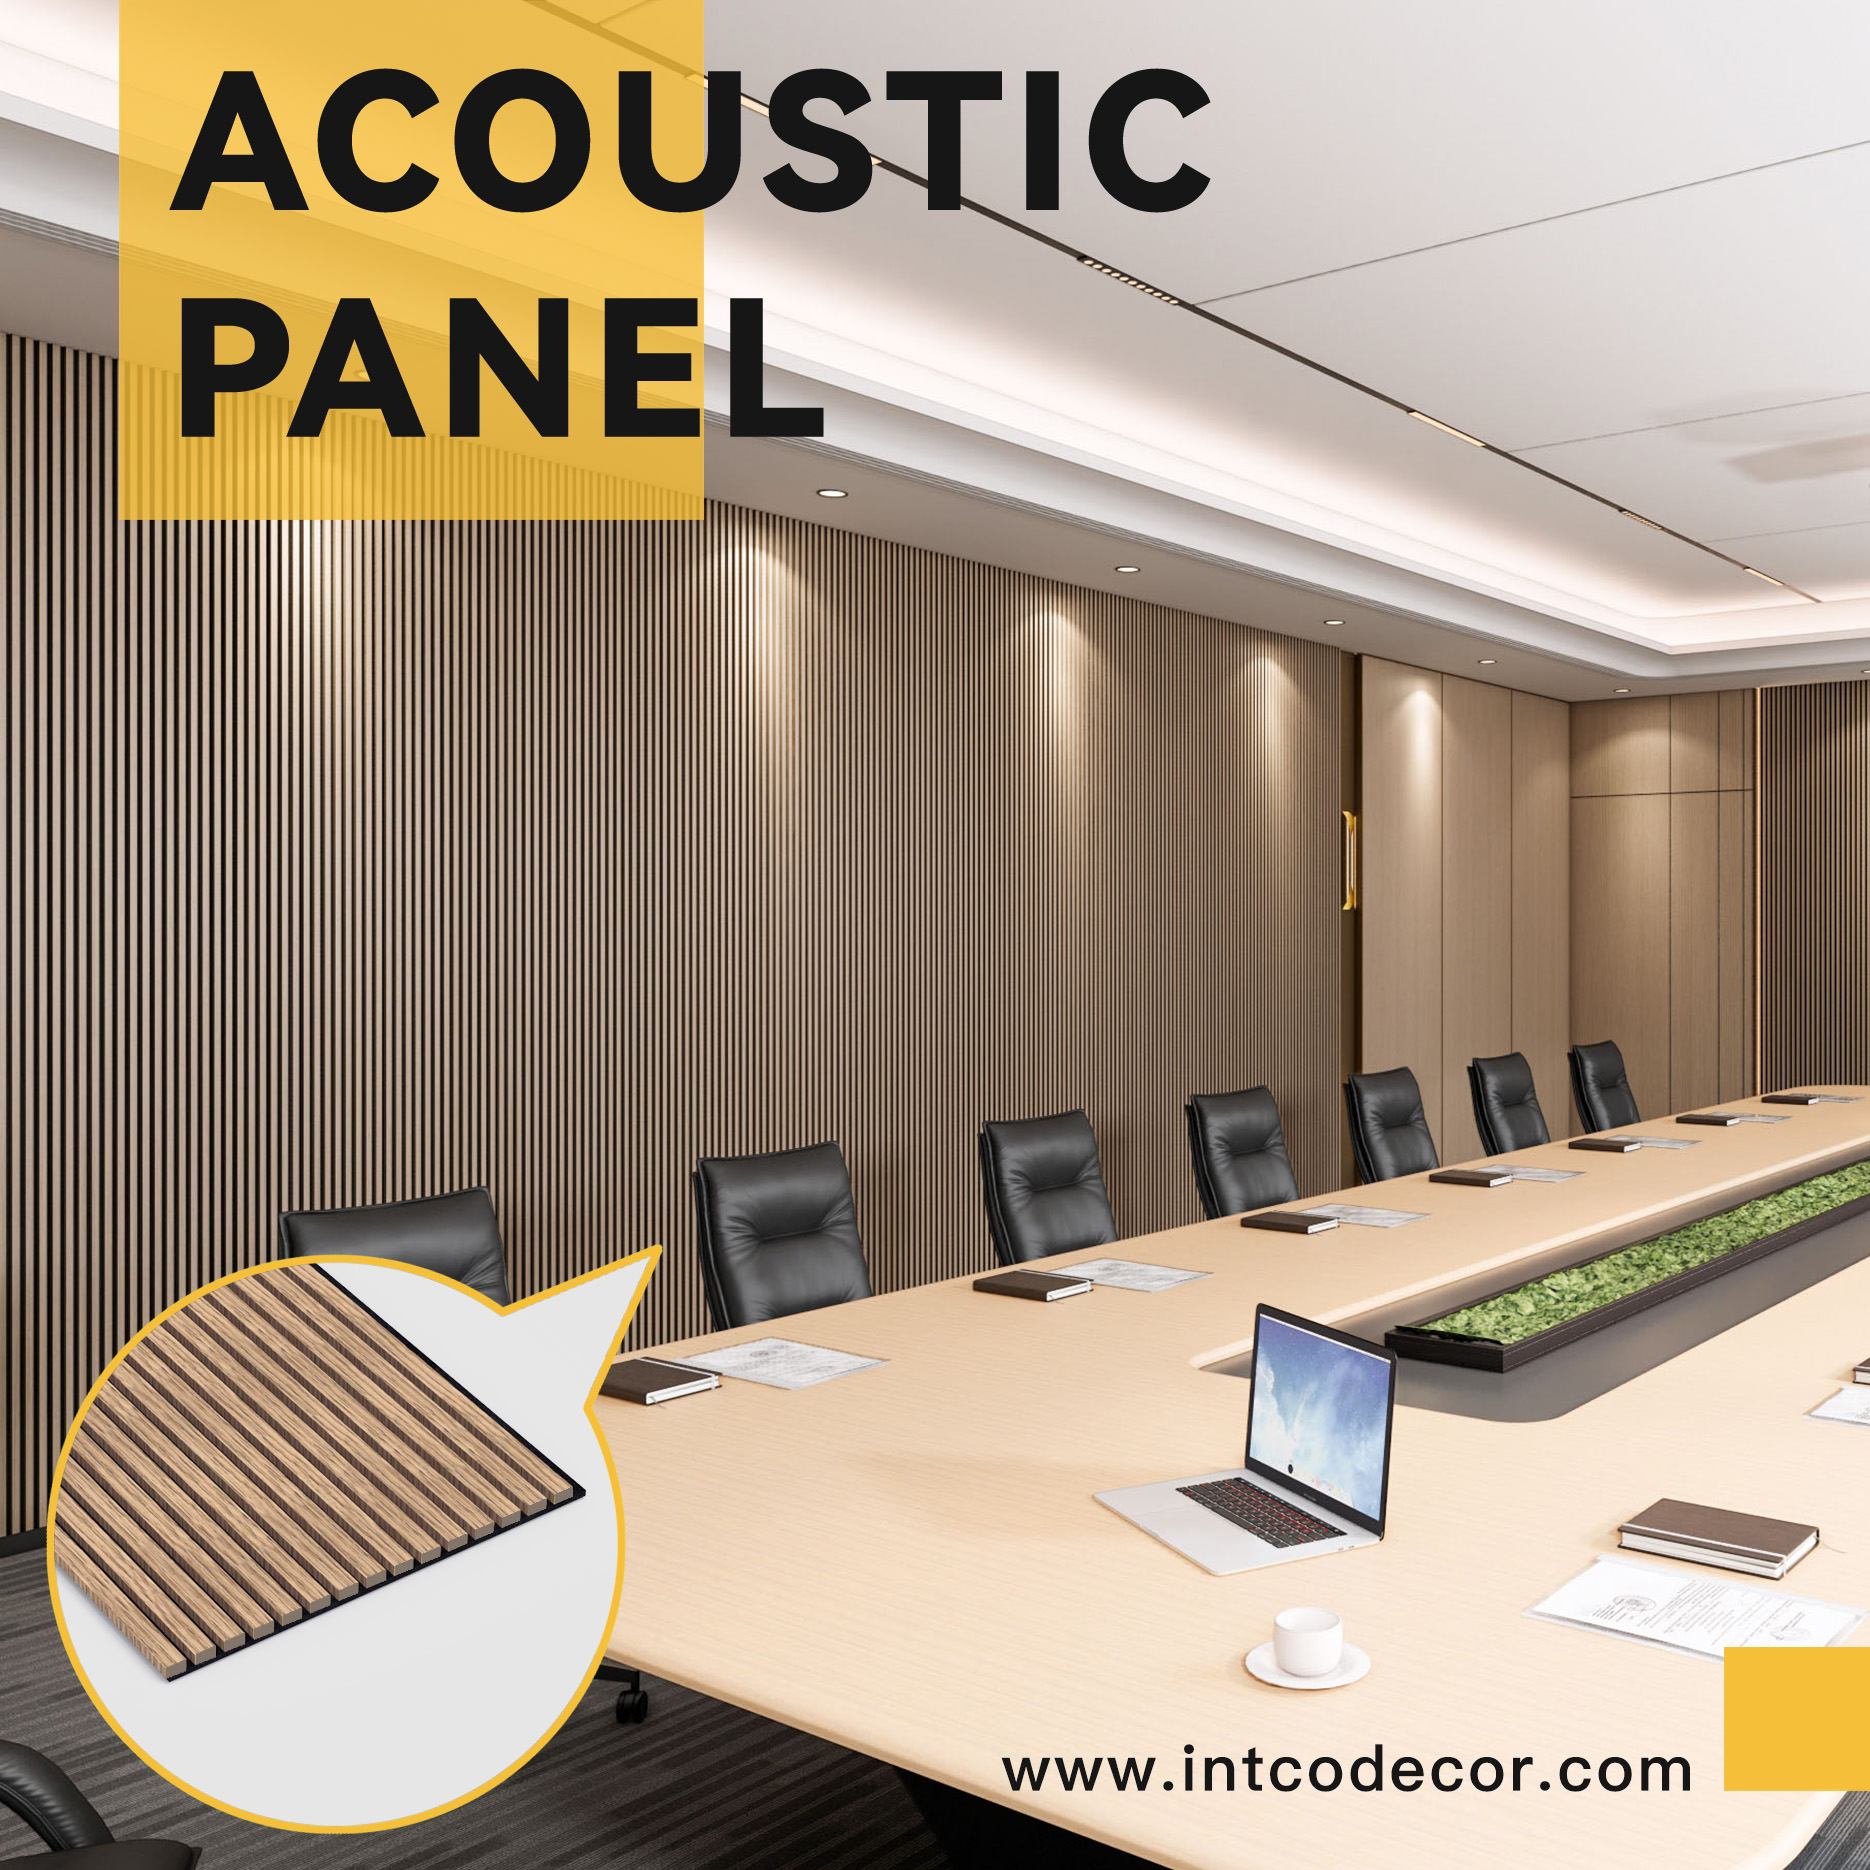 INTCO acoustic panels Control The Sound For A Well Balanced Meeting Room